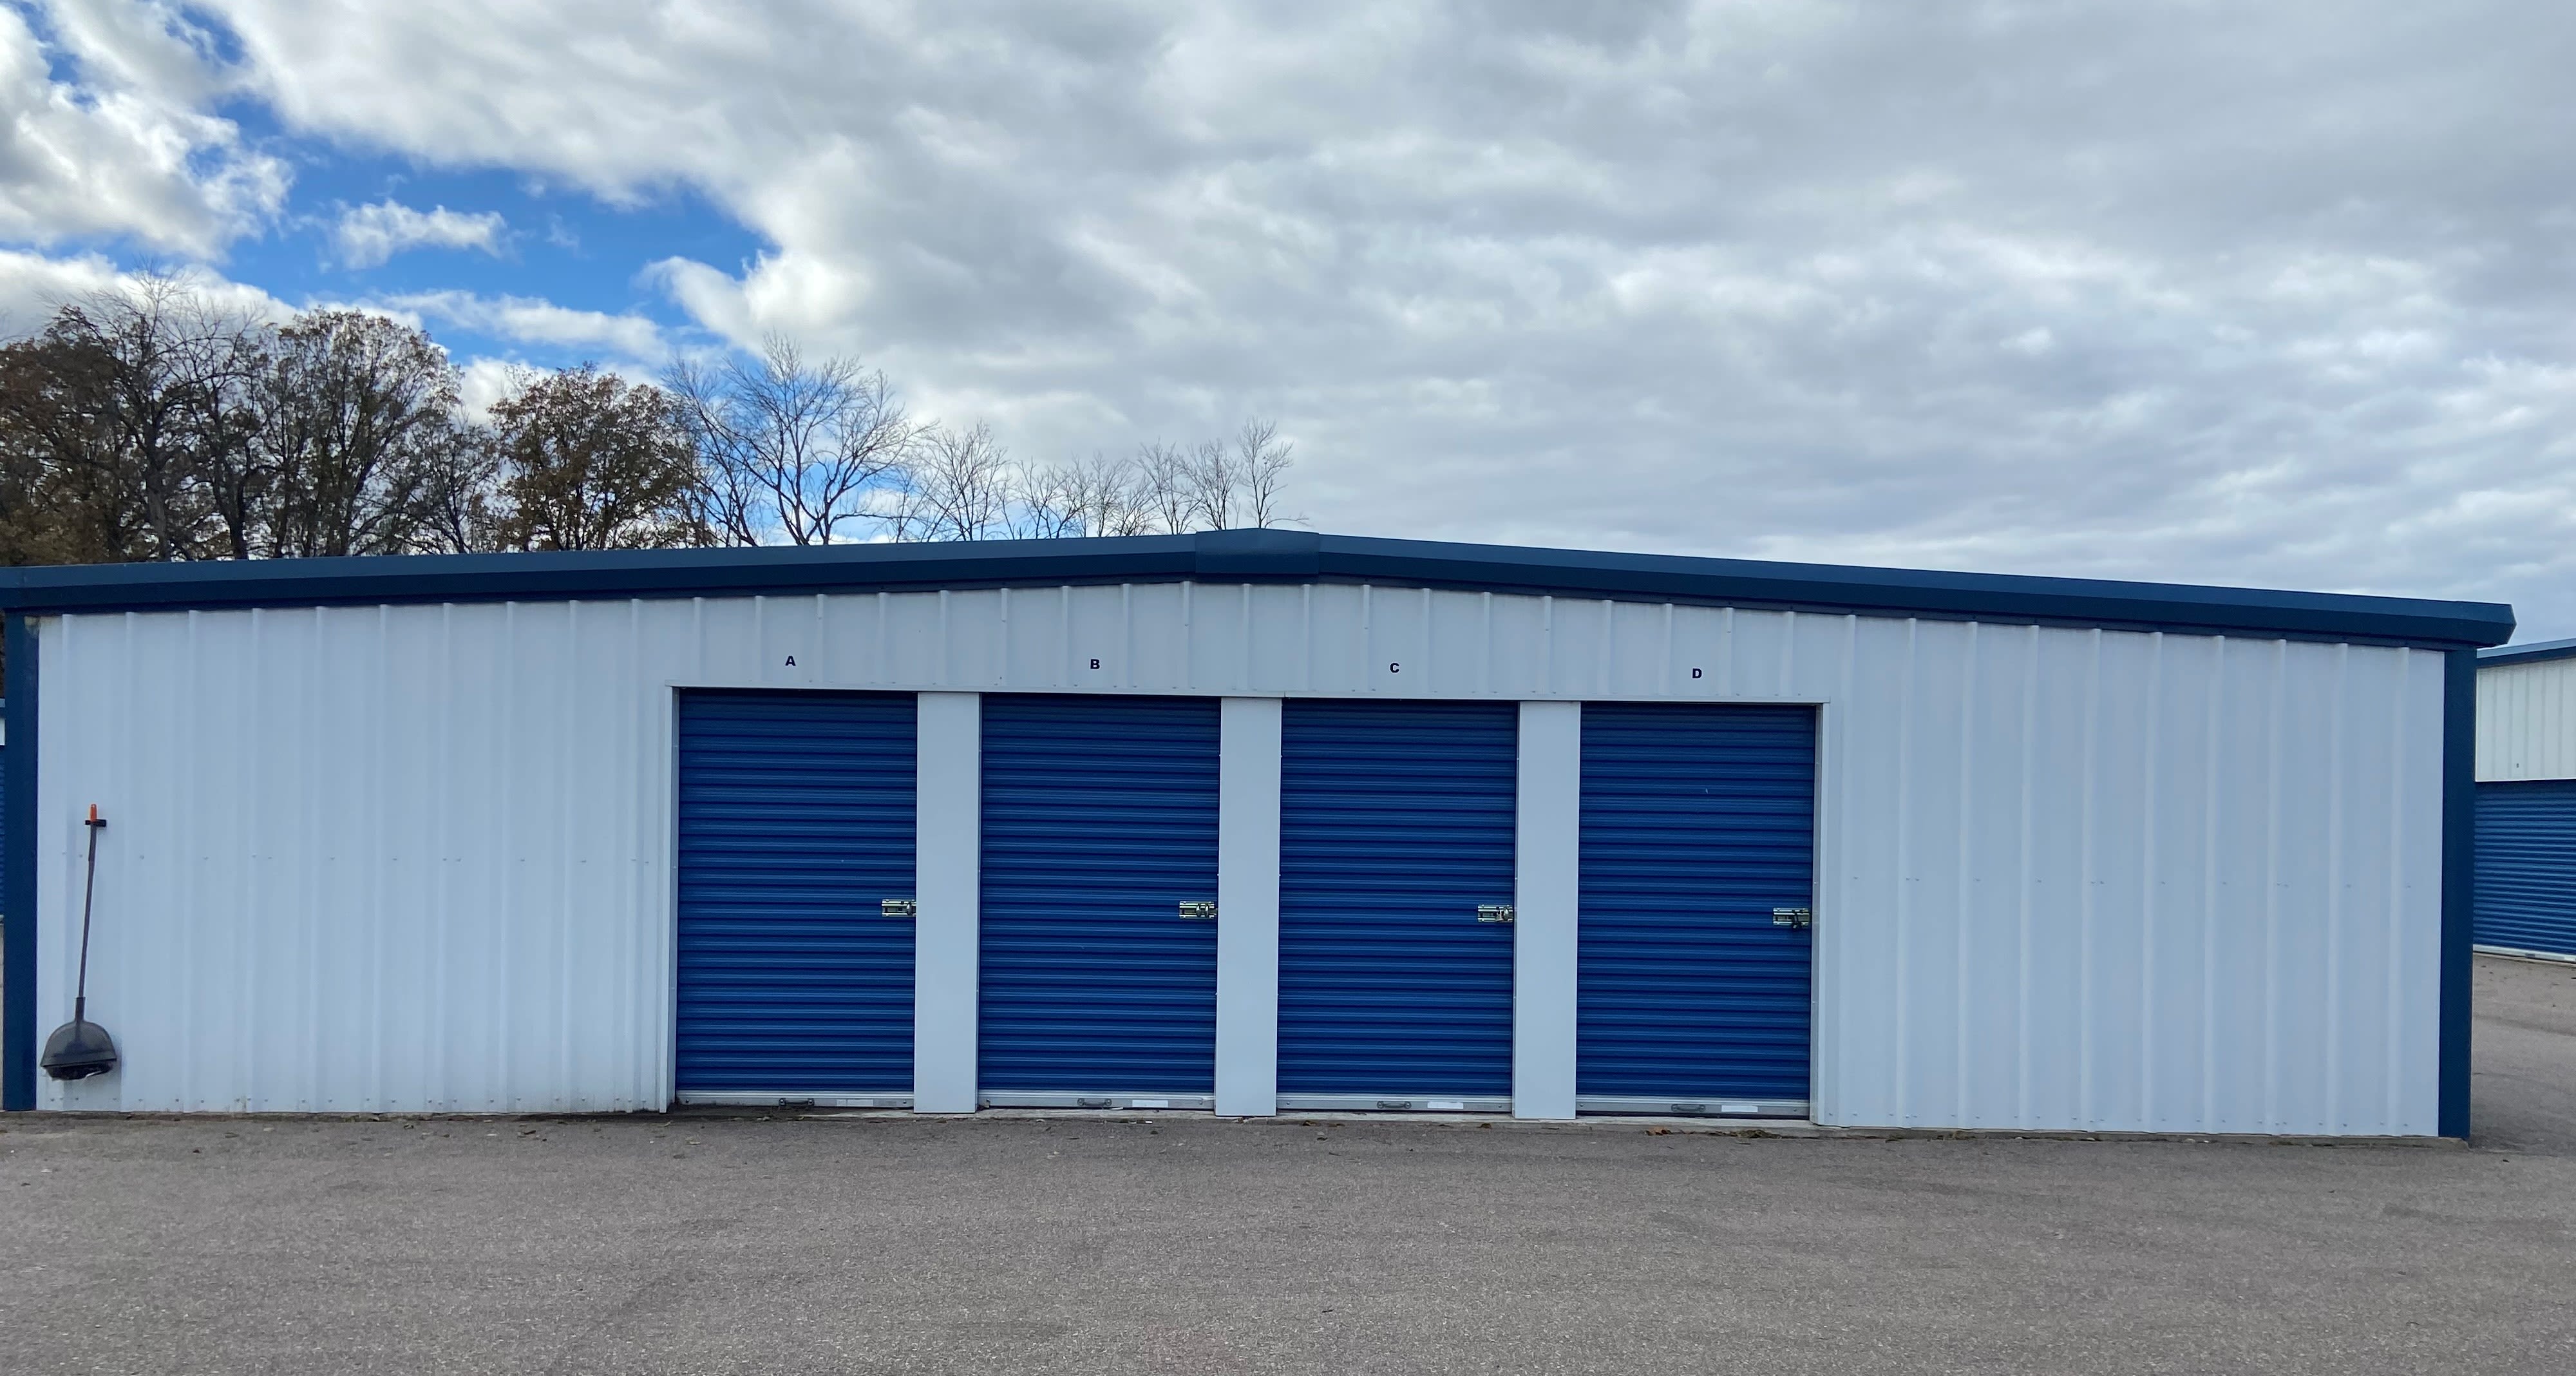 Learn more about features at KO Storage of Wisconsin Dells Hwy 16 in Wisconsin Dells, Wisconsin